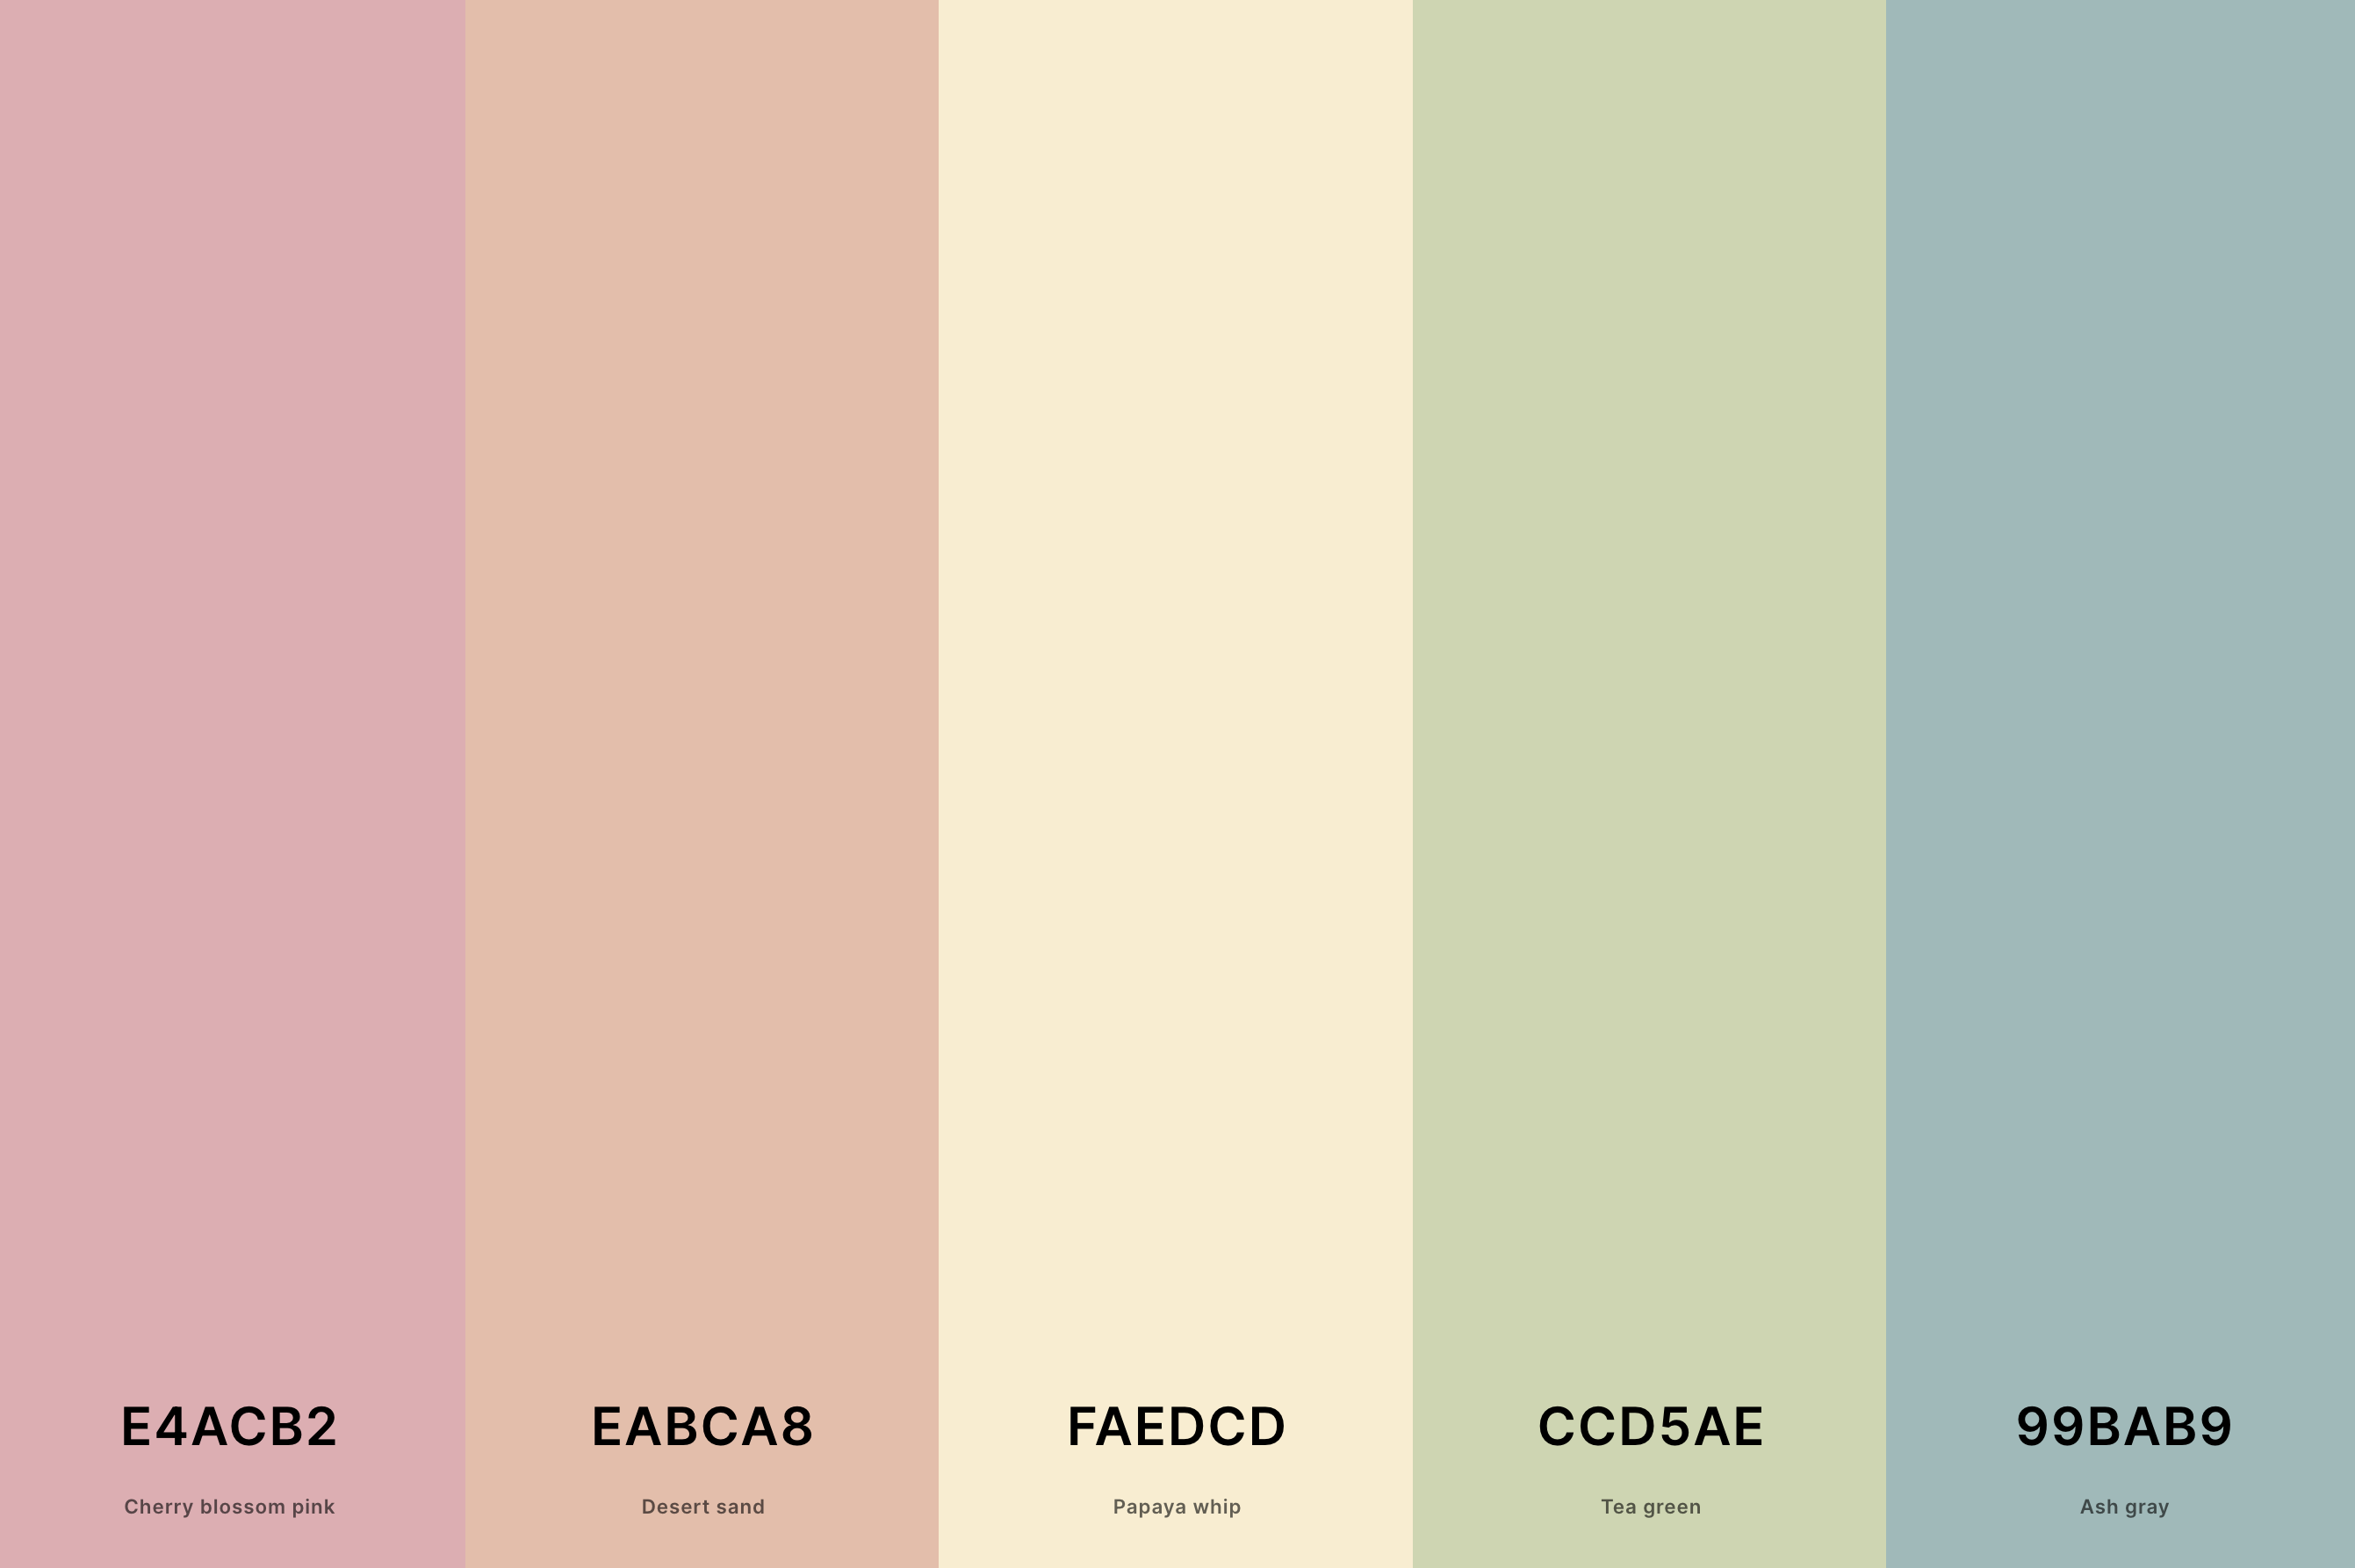 10. Muted Pastel Color Palette Color Palette with Cherry Blossom Pink (Hex #E4ACB2) + Desert Sand (Hex #EABCA8) + Papaya Whip (Hex #FAEDCD) + Tea Green (Hex #CCD5AE) + Ash Gray (Hex #99BAB9) Color Palette with Hex Codes